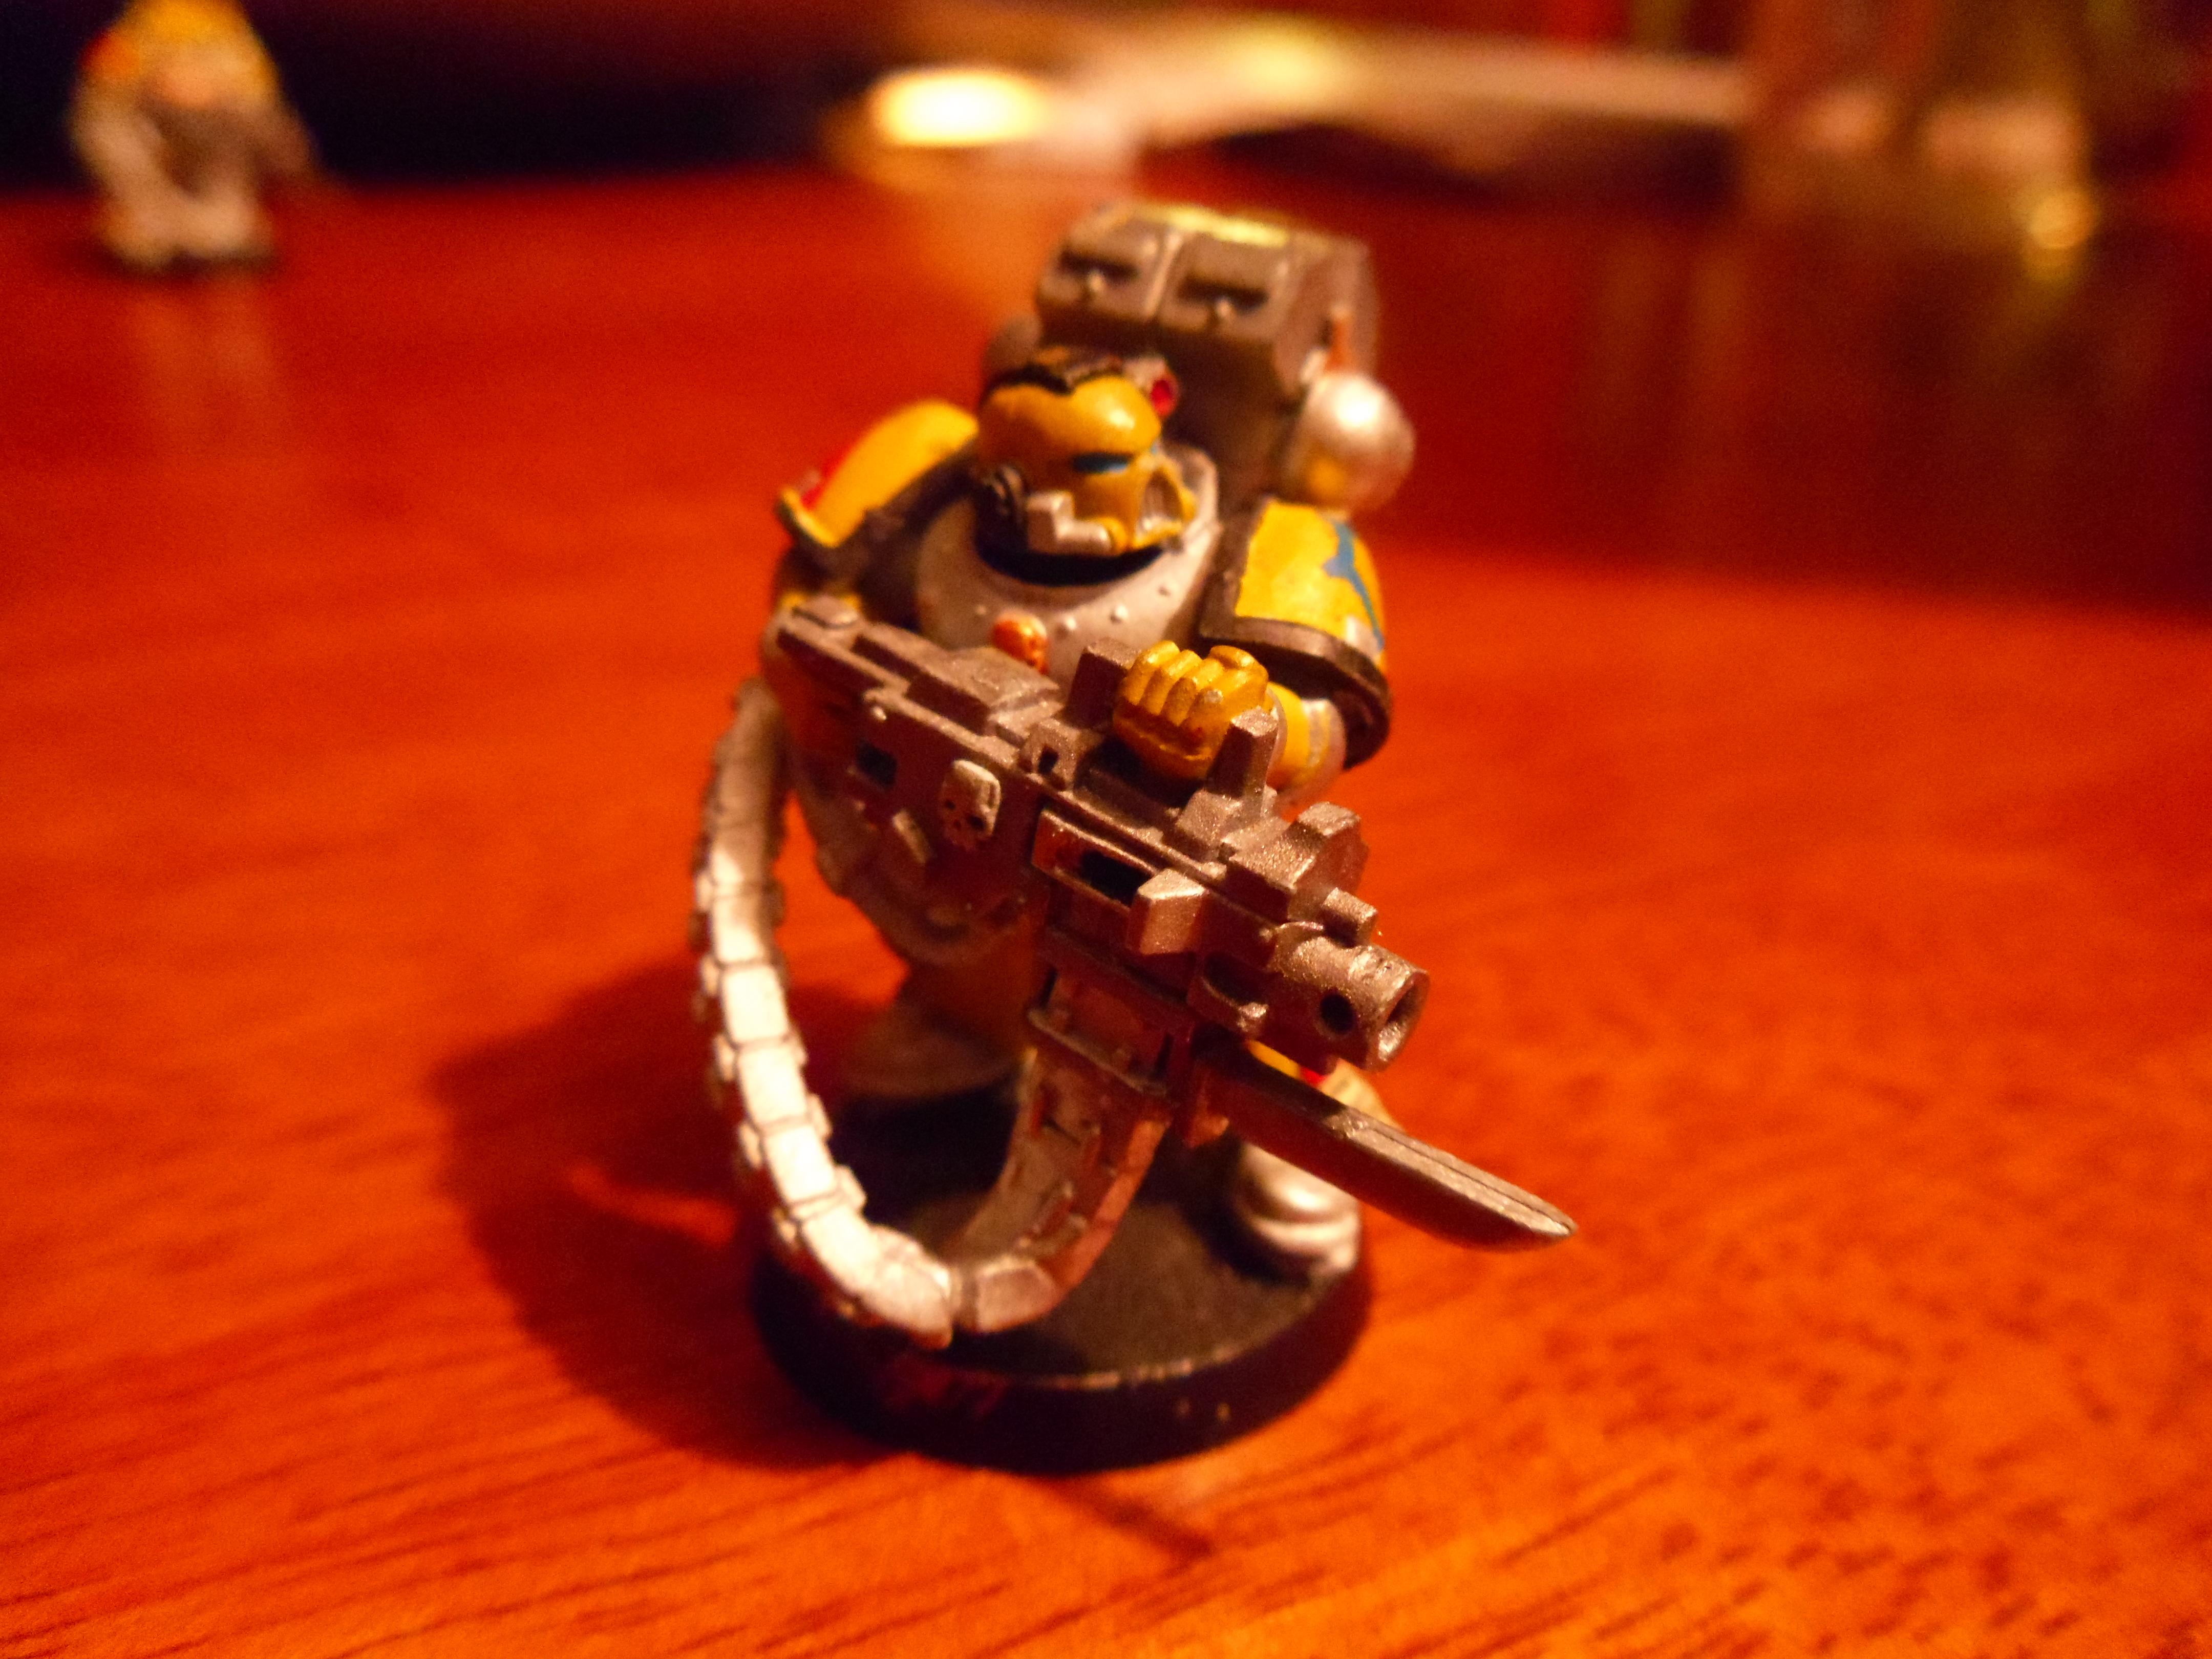 Angry, Budget, Cheap, Imperial Fists, Space Marines, Work In Progress, Yellow